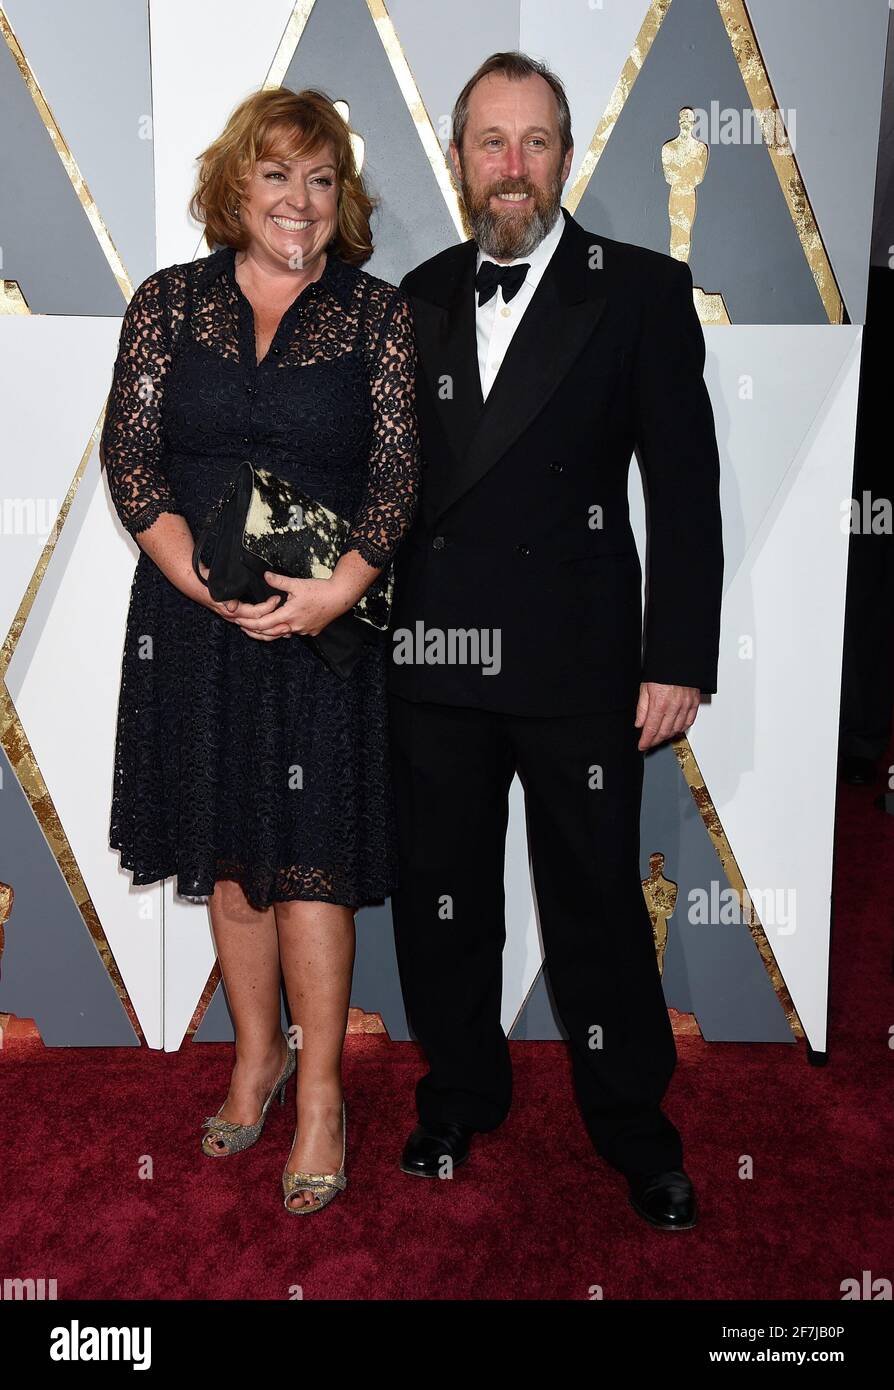 Eve Stewart, Michael Standish arrives to The 88th Academy Awards ceremony, The Oscars, held at the Dolby Theater, Sunday, February 28, 2016 in Hollywood, California. Photo by Jennifer Graylock-Graylock.com 917-519-7666 Stock Photo